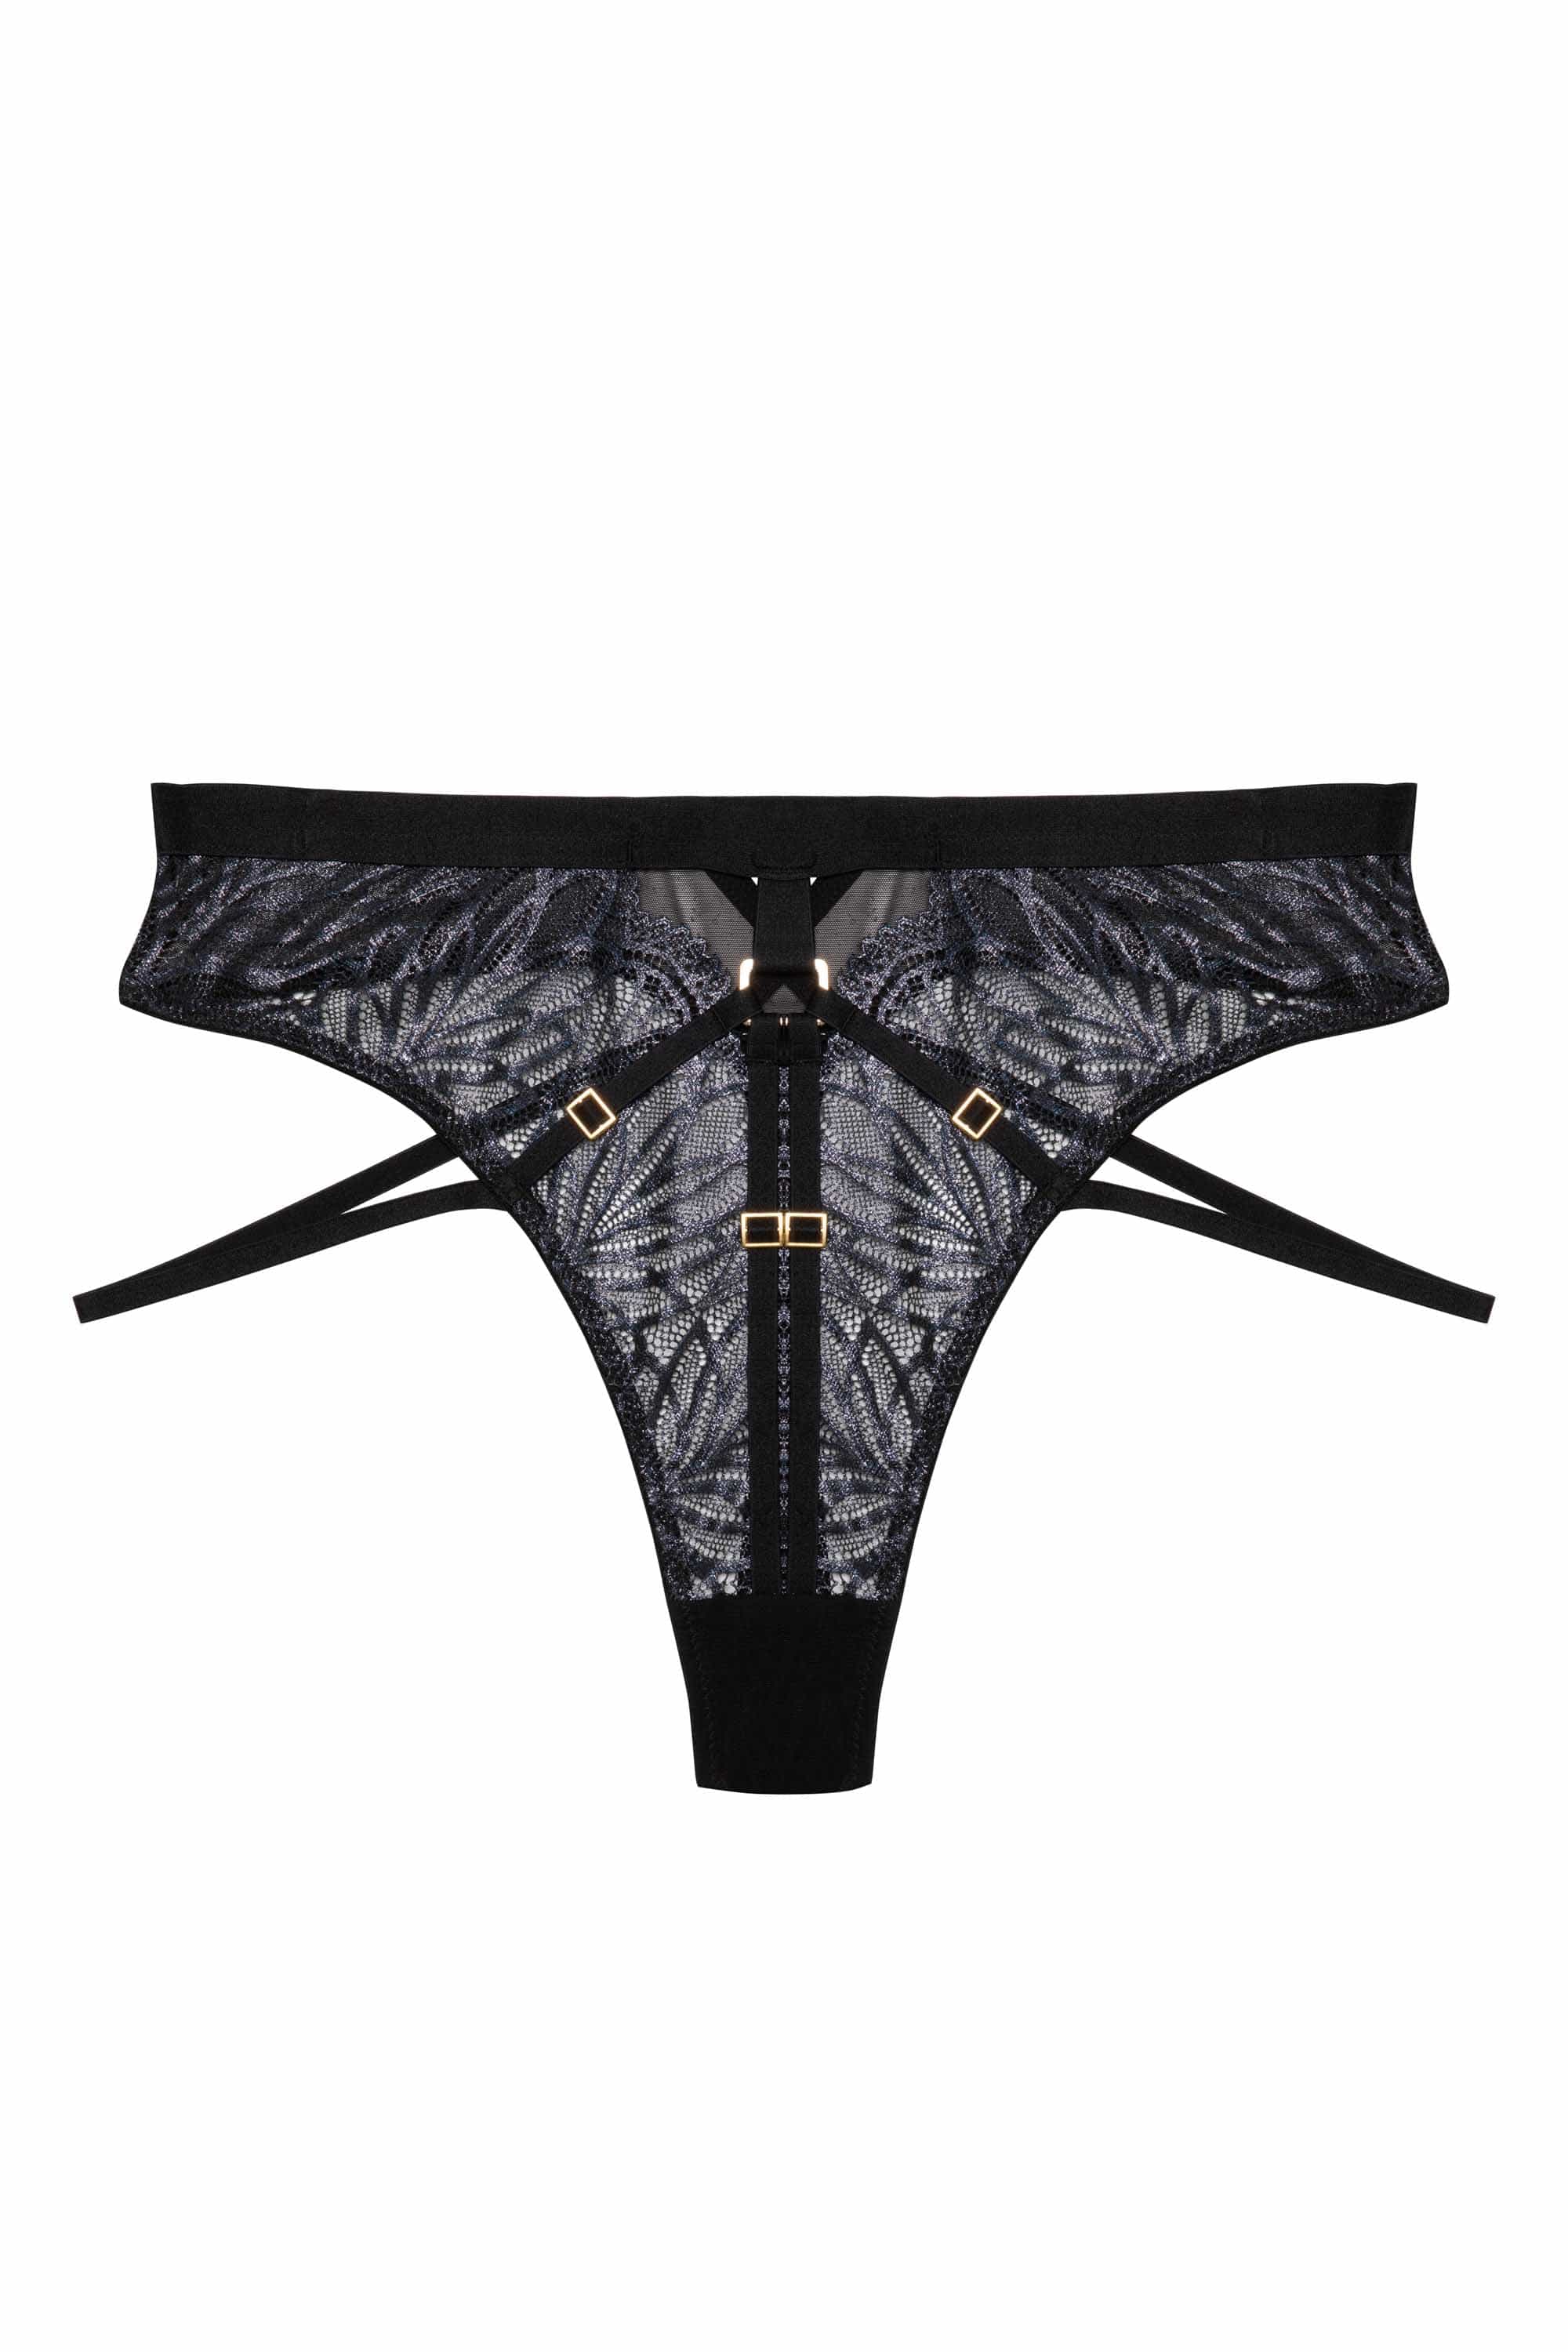 Black wet look lace high waist thong with straps